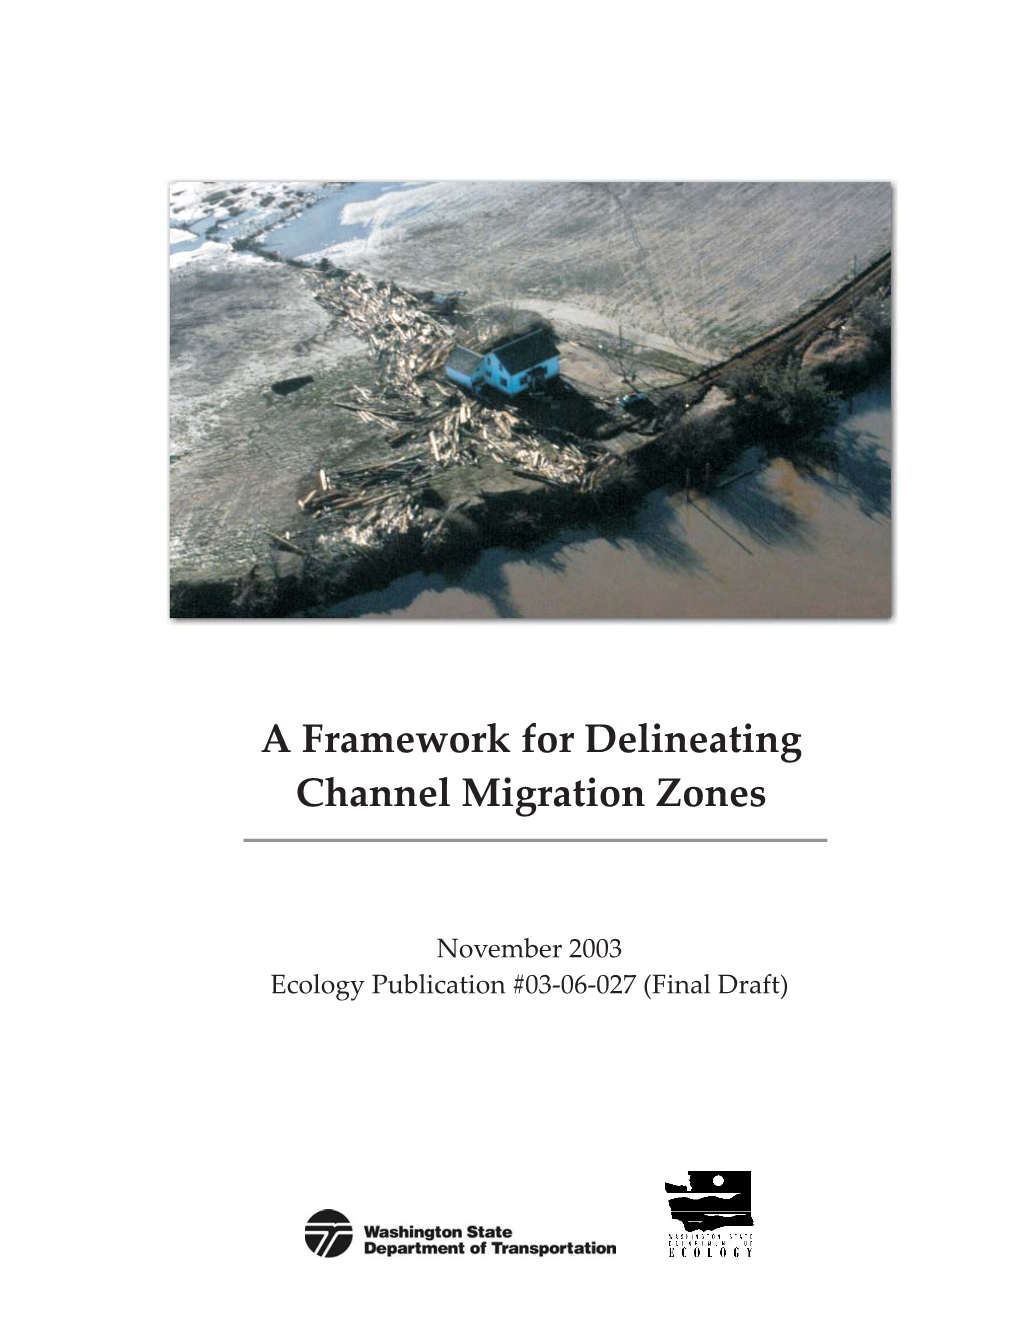 A Framework for Delineating Channel Migration Zones